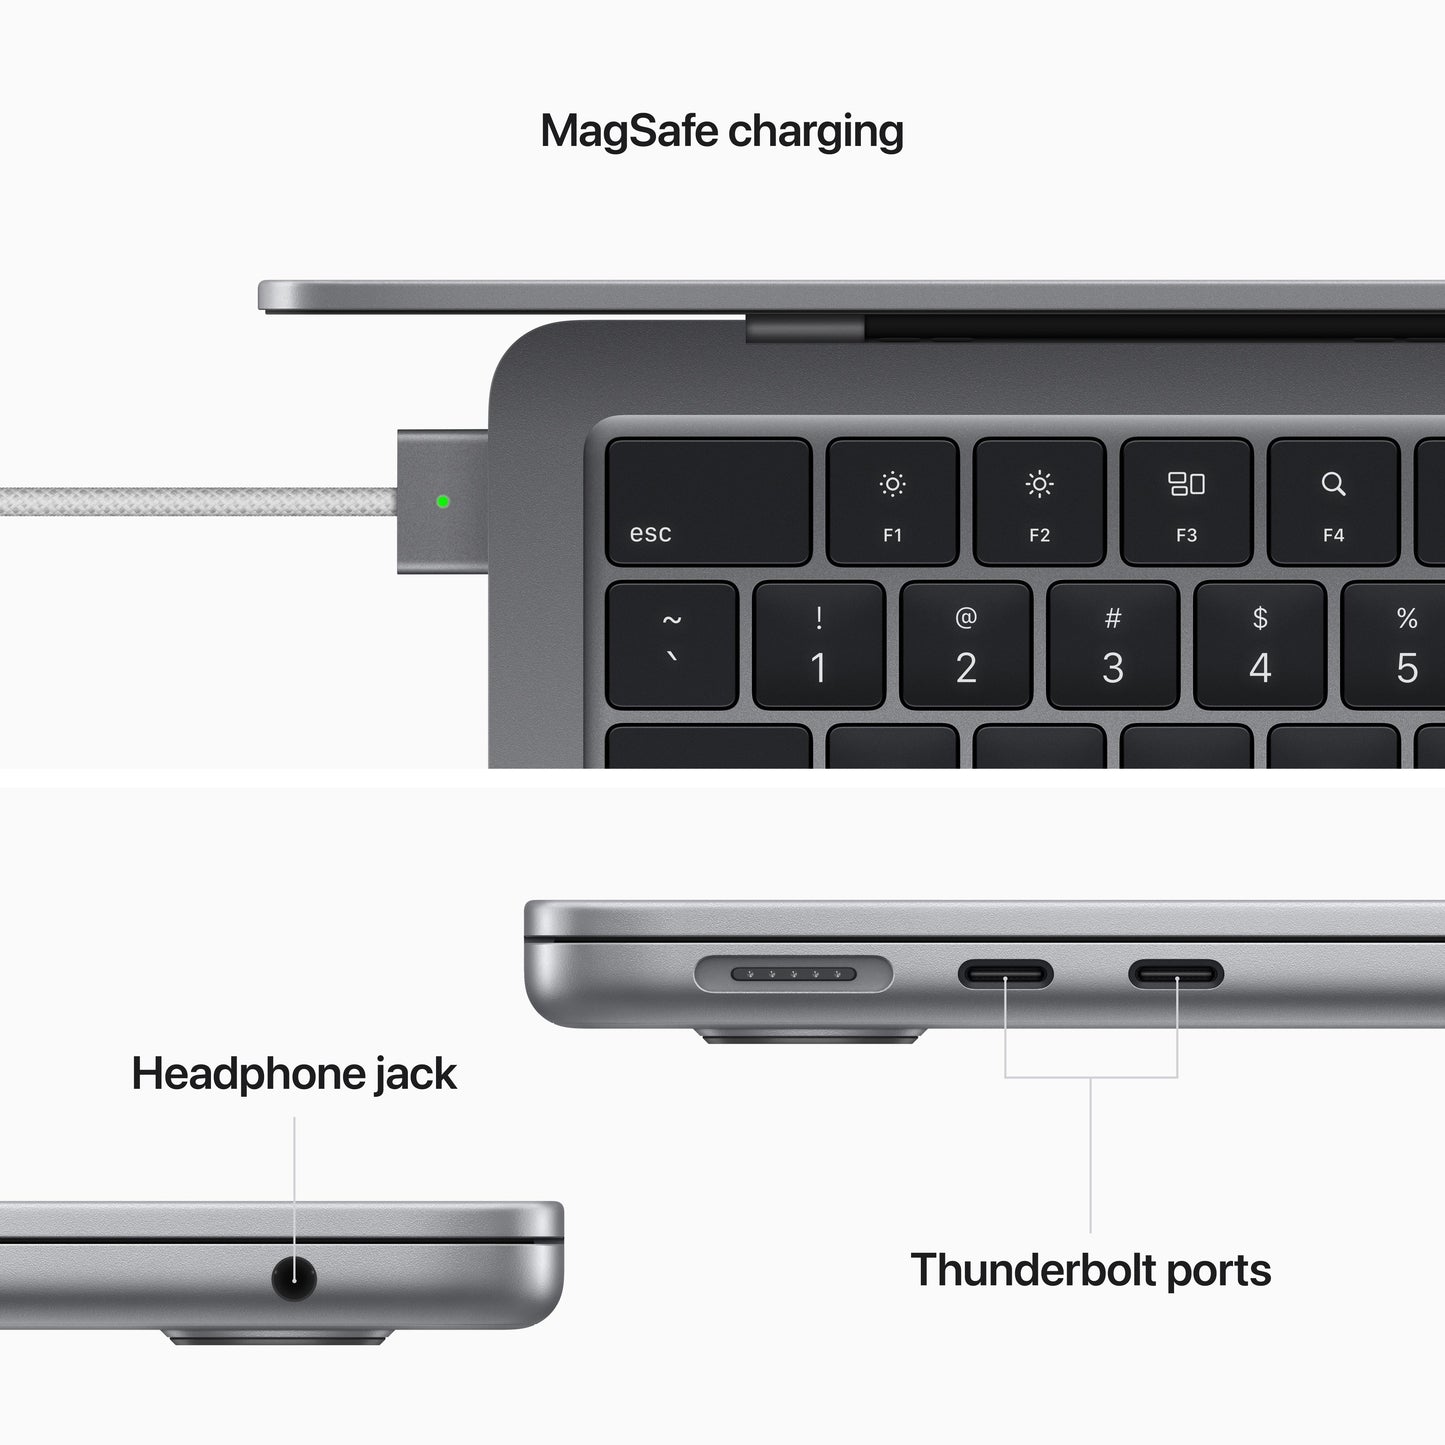 13-inch MacBook Air: Apple M2 chip with 8, core CPU and 8, core GPU, 256GB SSD - Space Grey